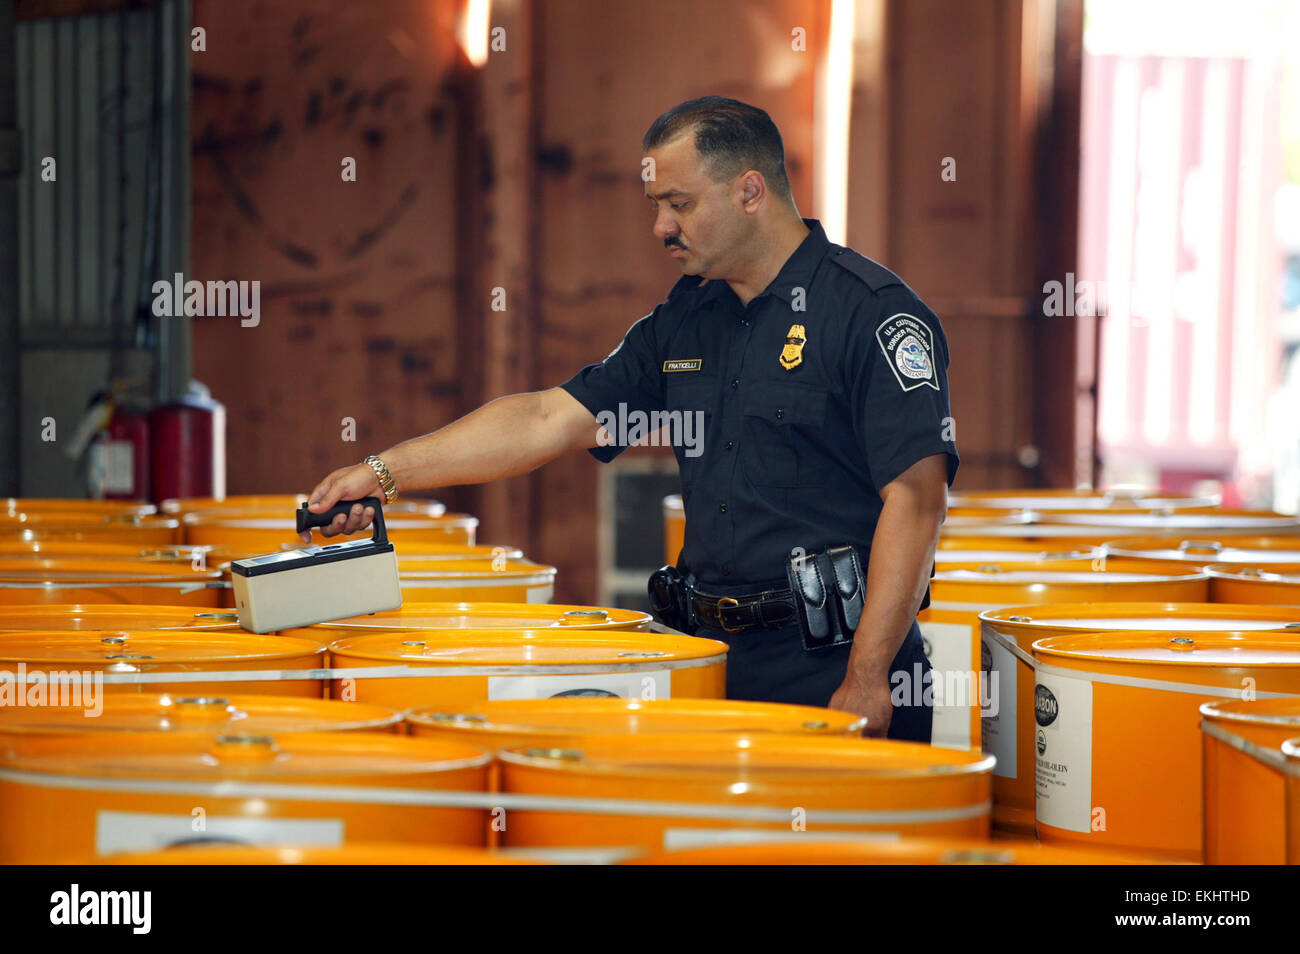 U.S. Customs and Border Patrol agent conducts search on barrel containers with the use of an electronic device called a Buster which shows space anomalies inside.  .  James Tourtellotte Stock Photo